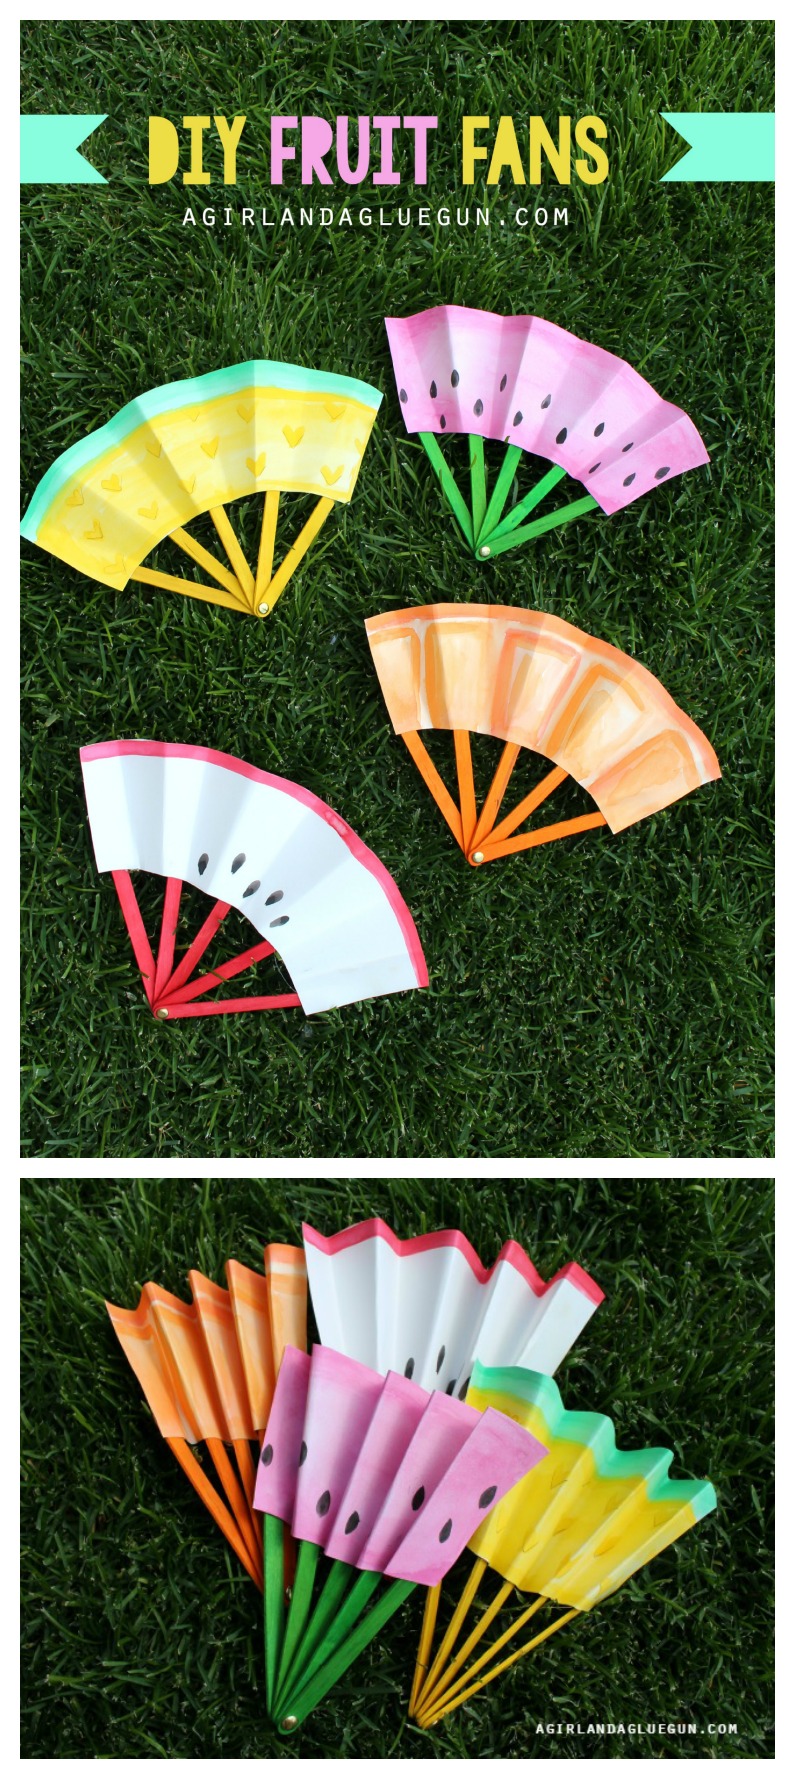 diy-fruit-fan-crafts-with-painted-paper-and-popsicle-sticks-a-useful